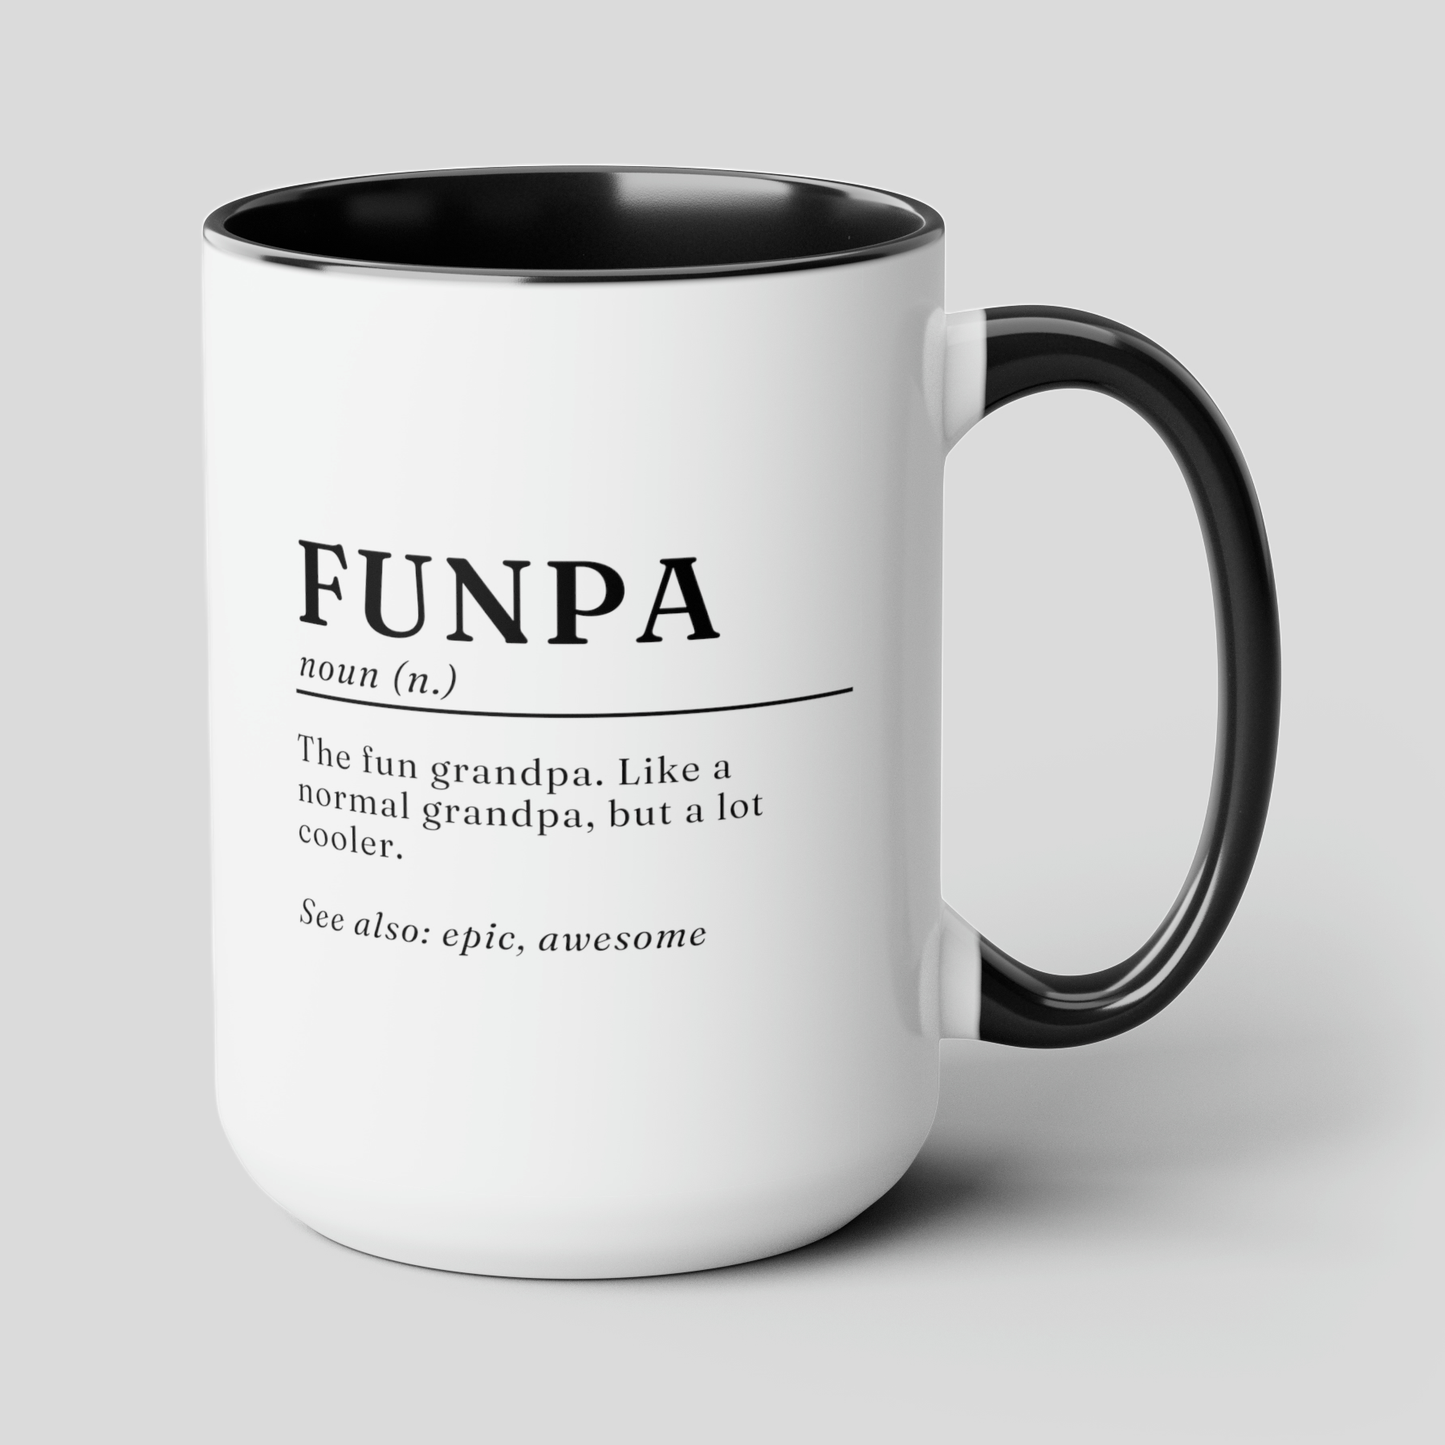 Funpa definition 15oz white with black accent funny large coffee mug gift for grandpa grandfather grandad pops custom pop personalized waveywares wavey wares wavywares wavy wares cover